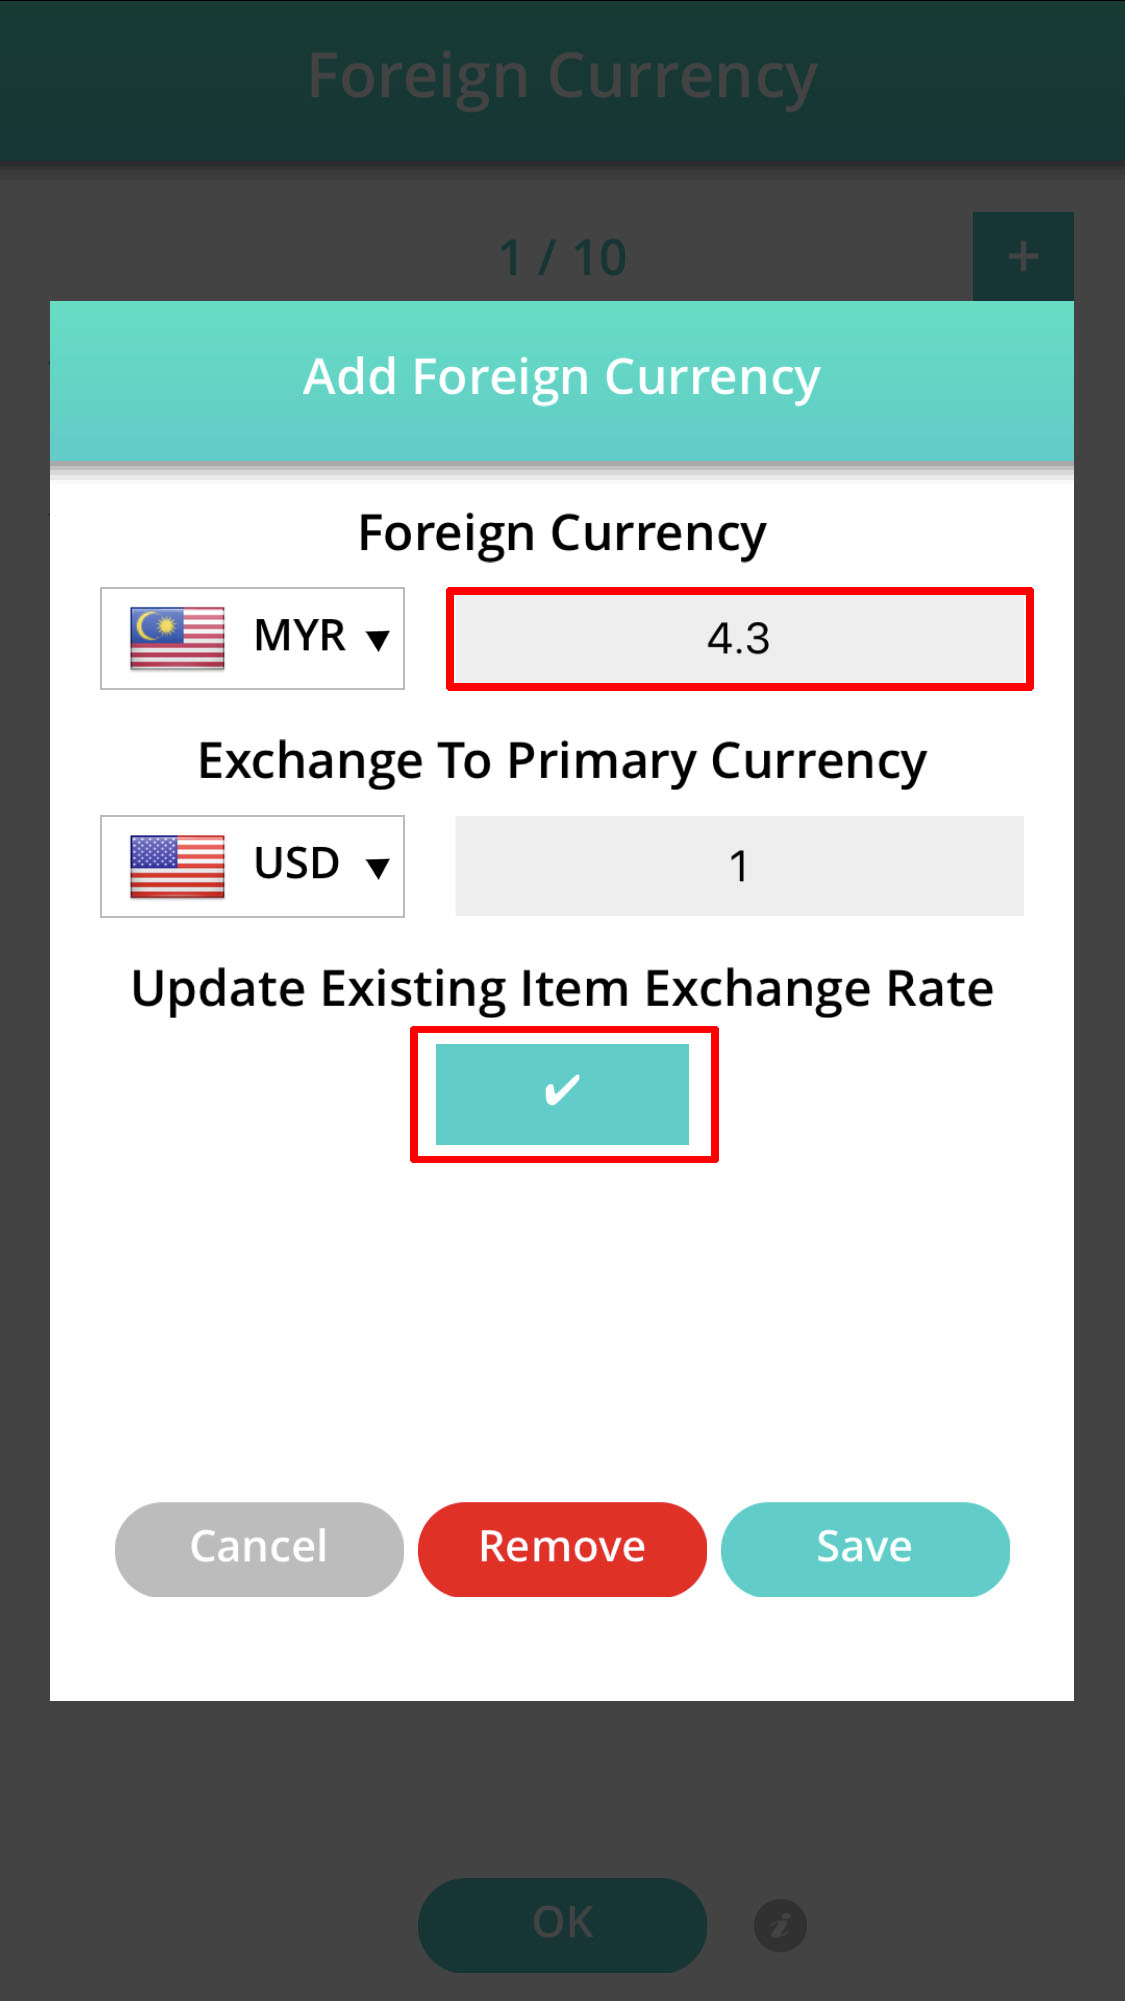 update existing item exchange rate option